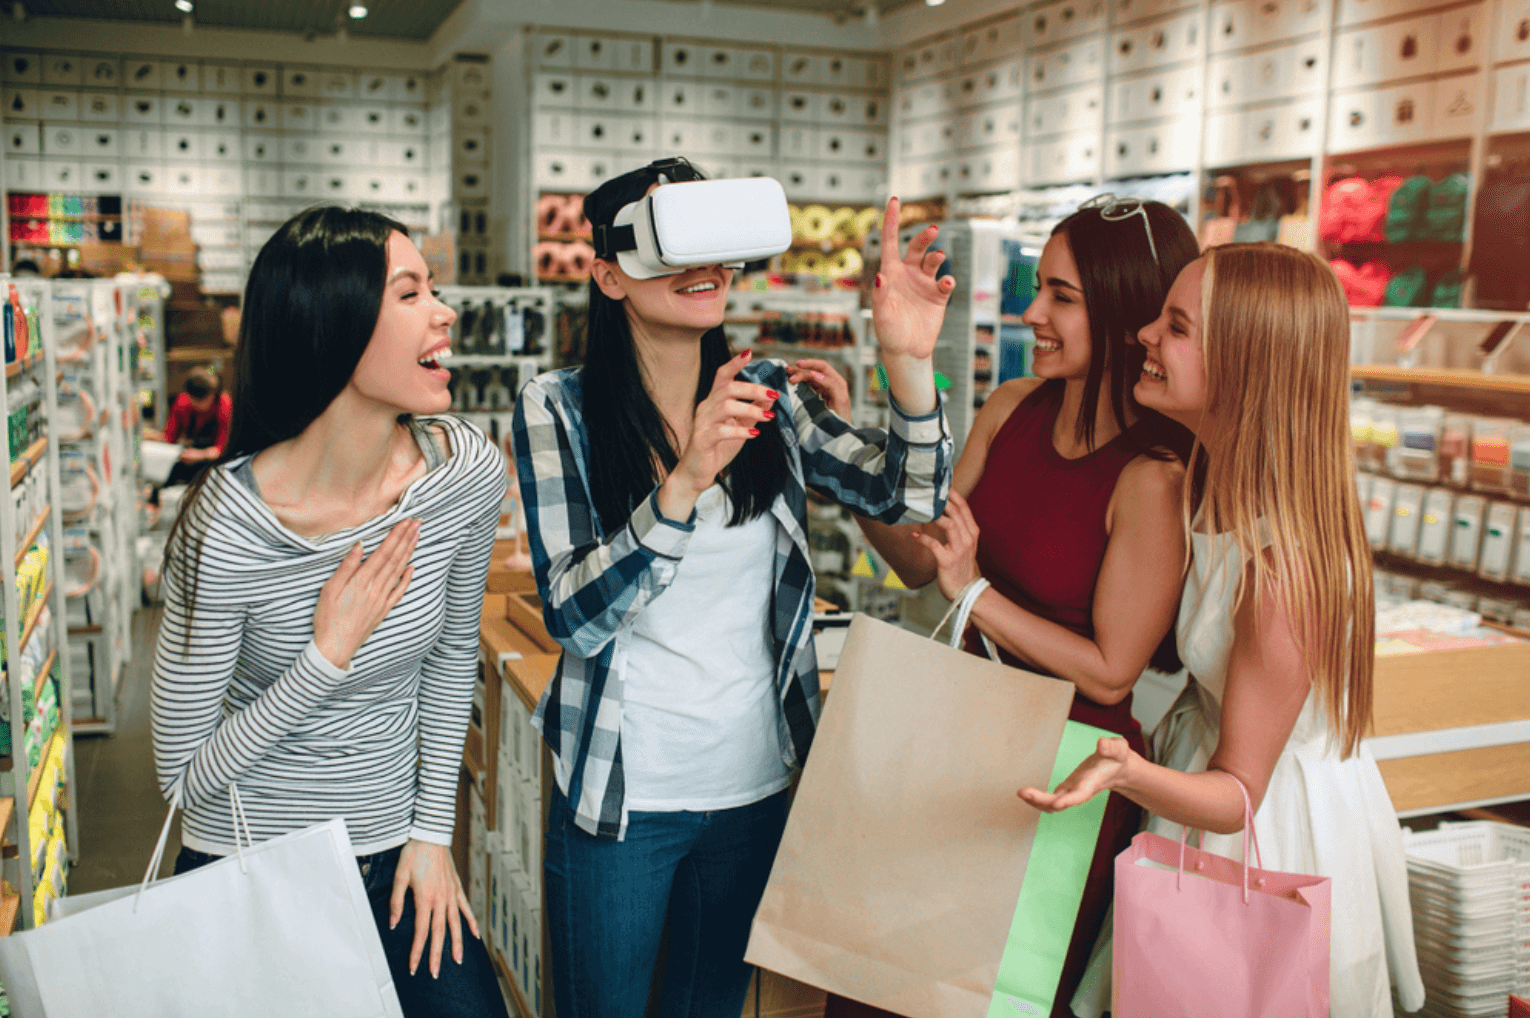 4 Major Issues of VR-Based Retail & Shopping